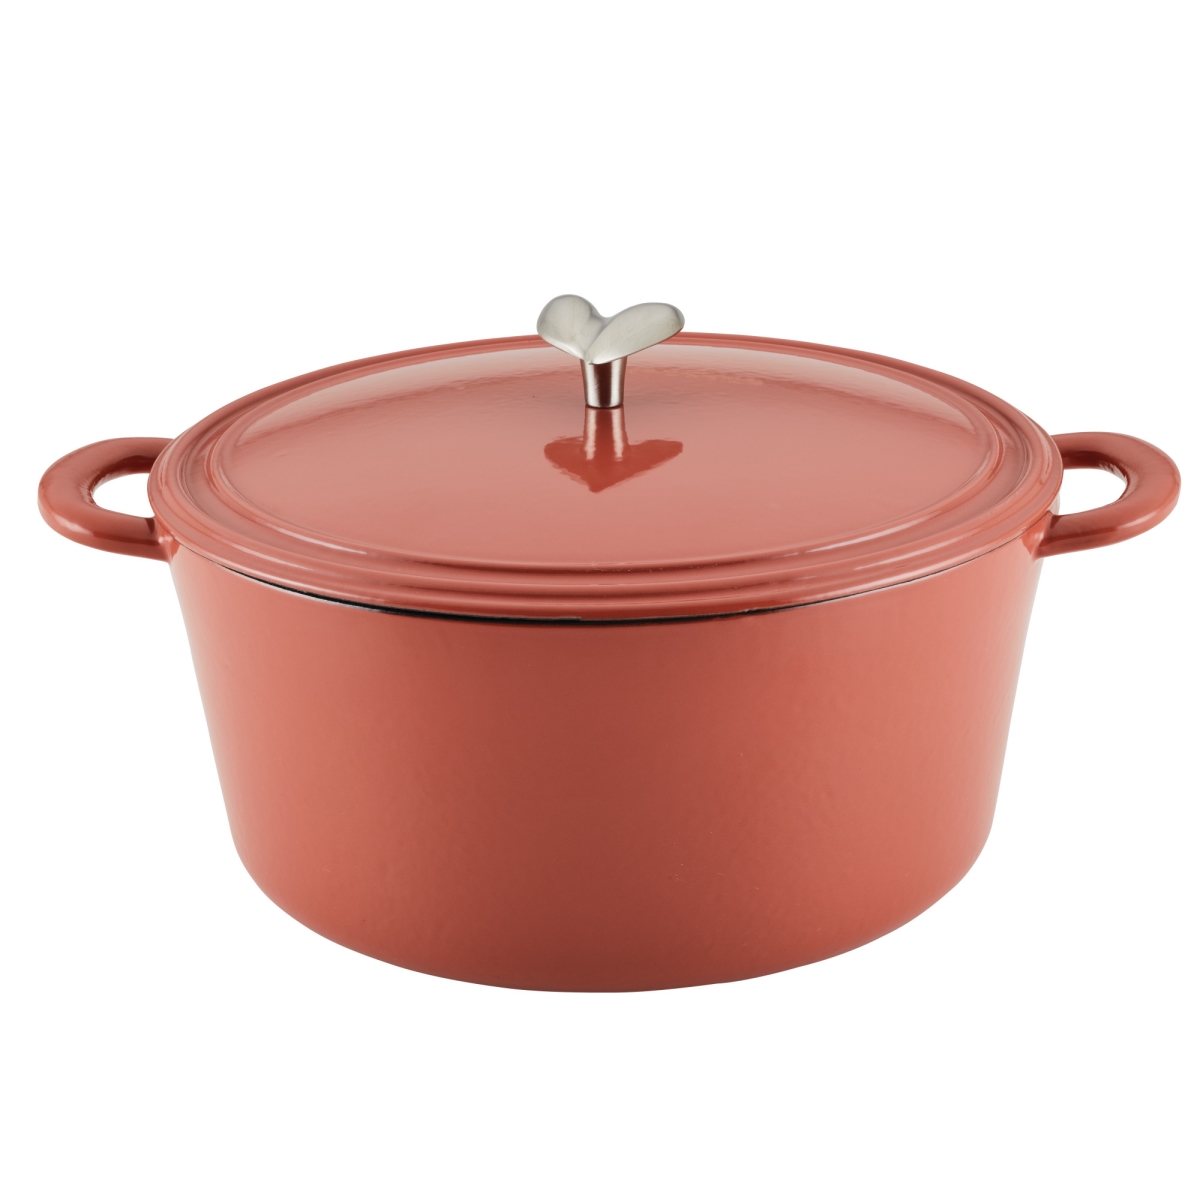 Picture of Ayesha Curry 48443 6 qt. Enameled Cast Iron Induction Dutch Oven with Lid, Redwood Red